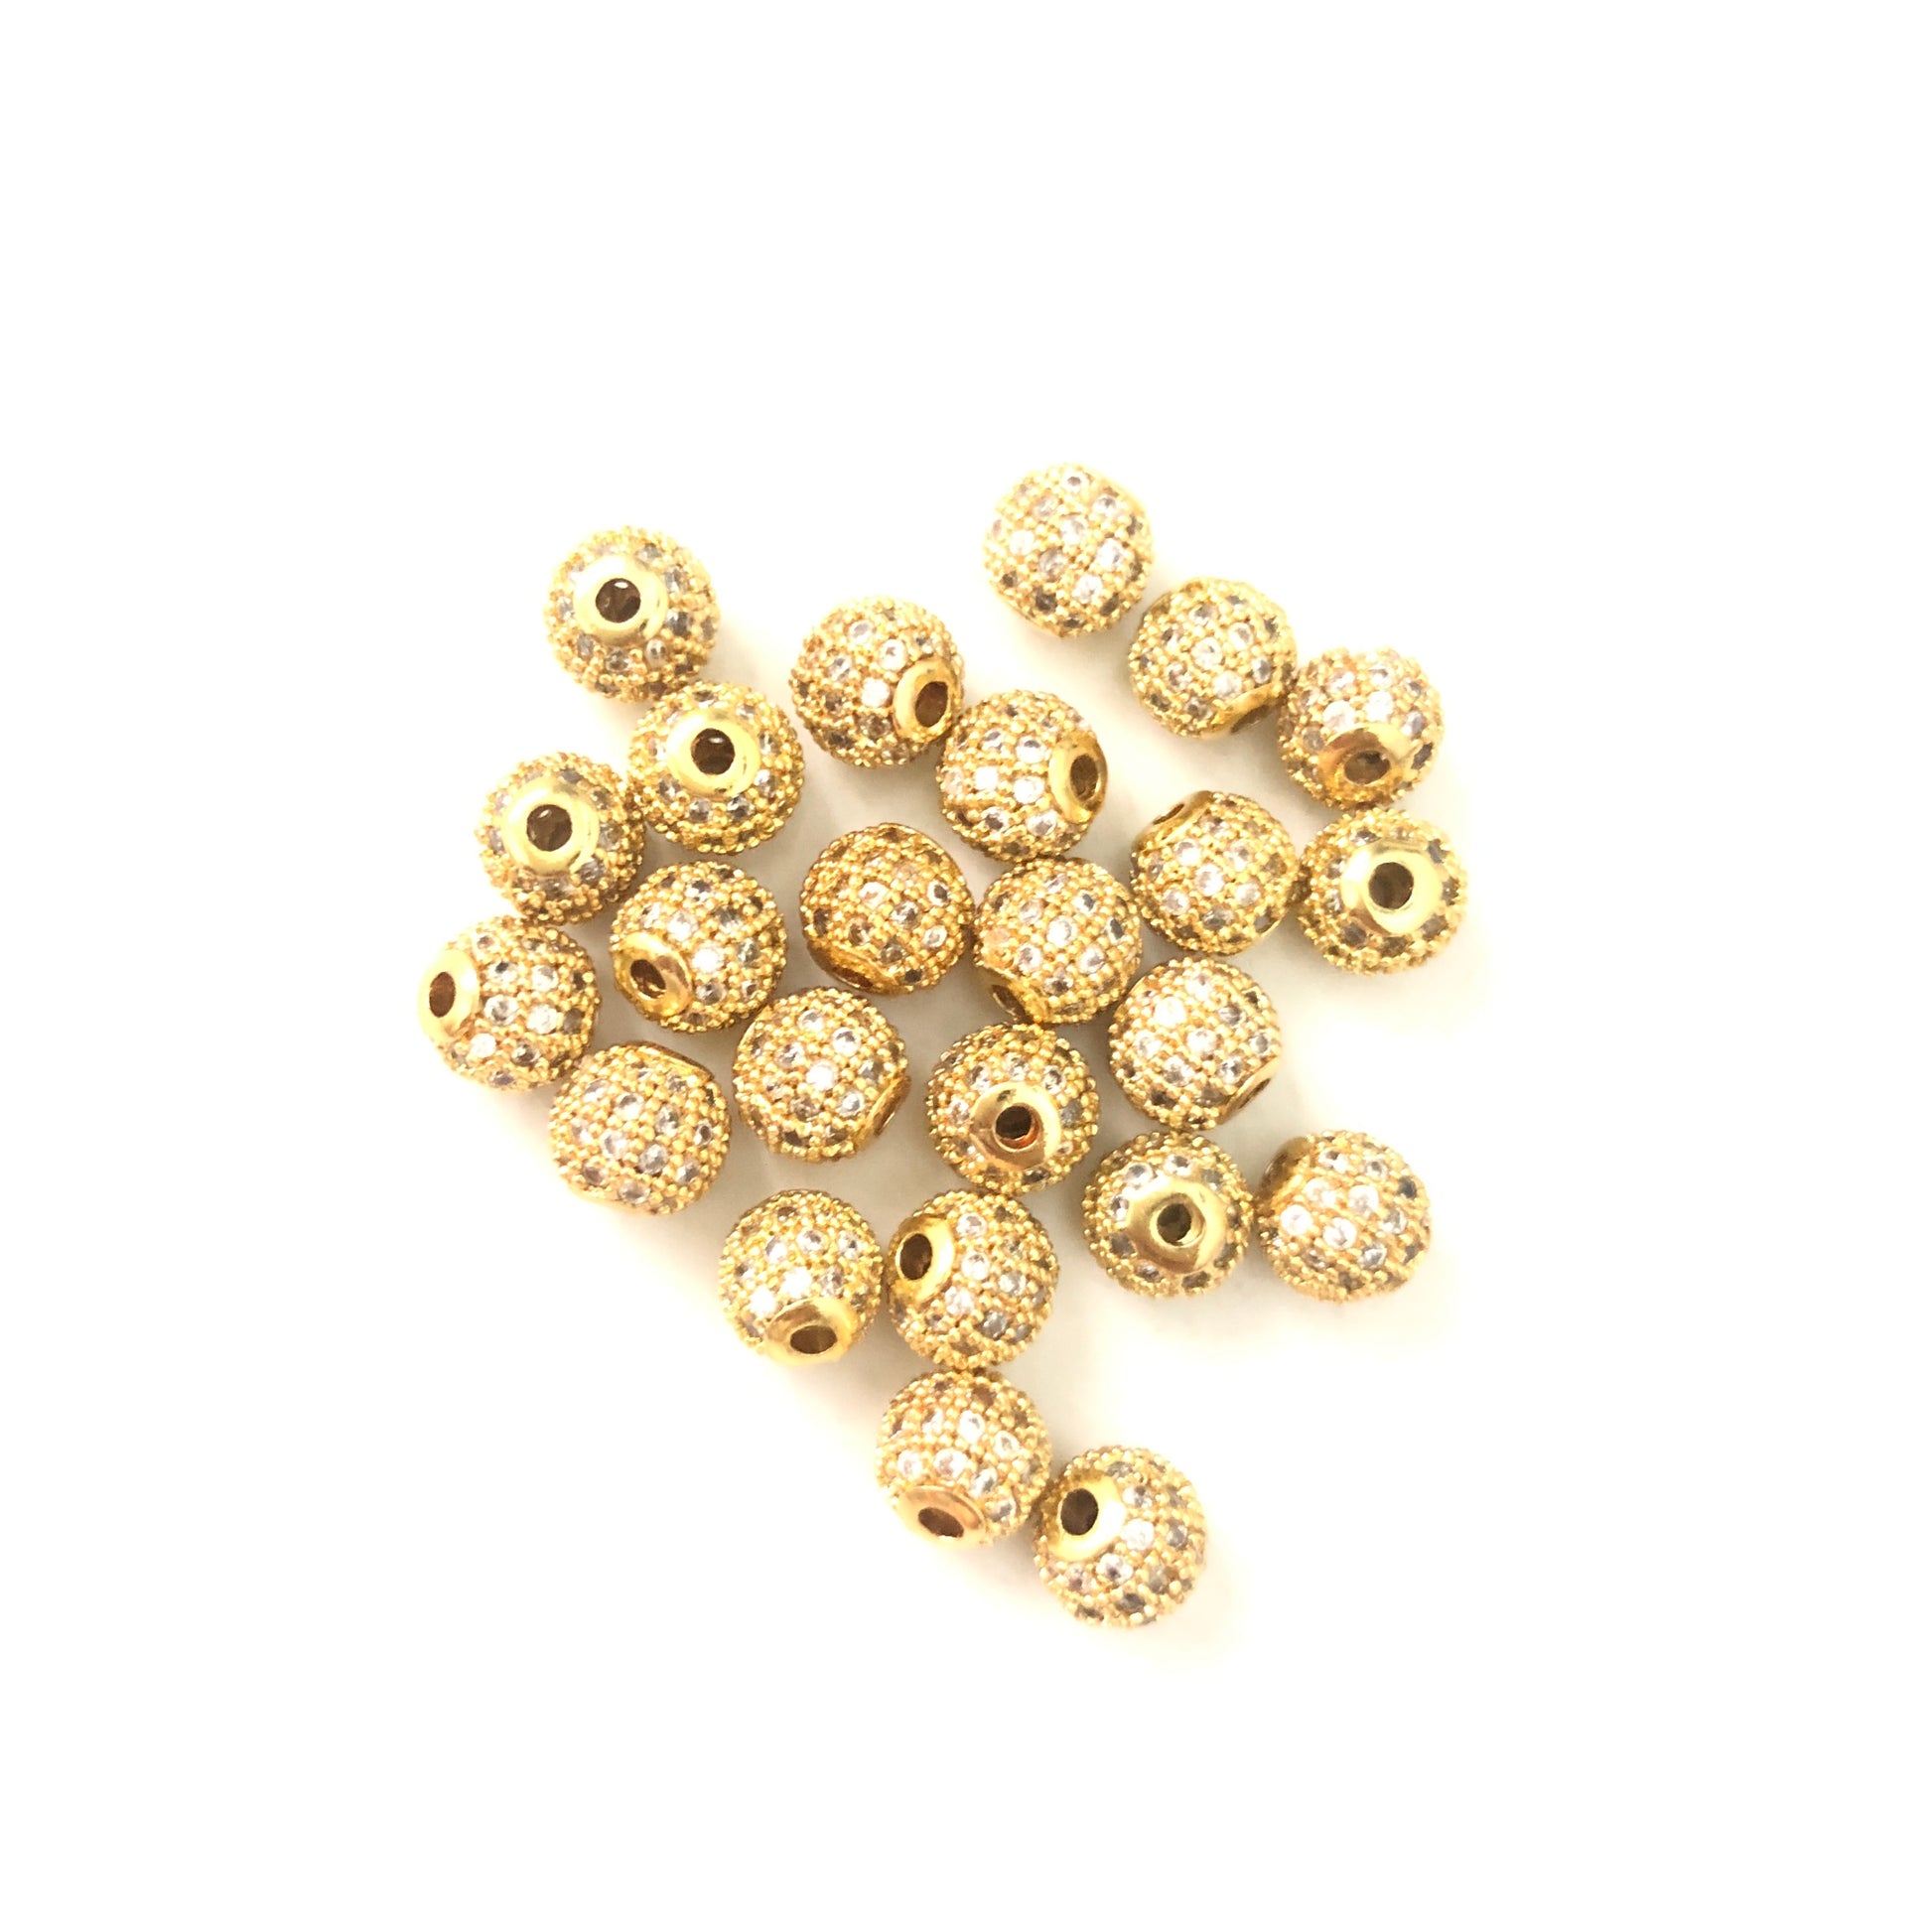 20pcs/lot 6mm Clear CZ Paved Ball Spacers Gold CZ Paved Spacers 6mm Beads Ball Beads Charms Beads Beyond